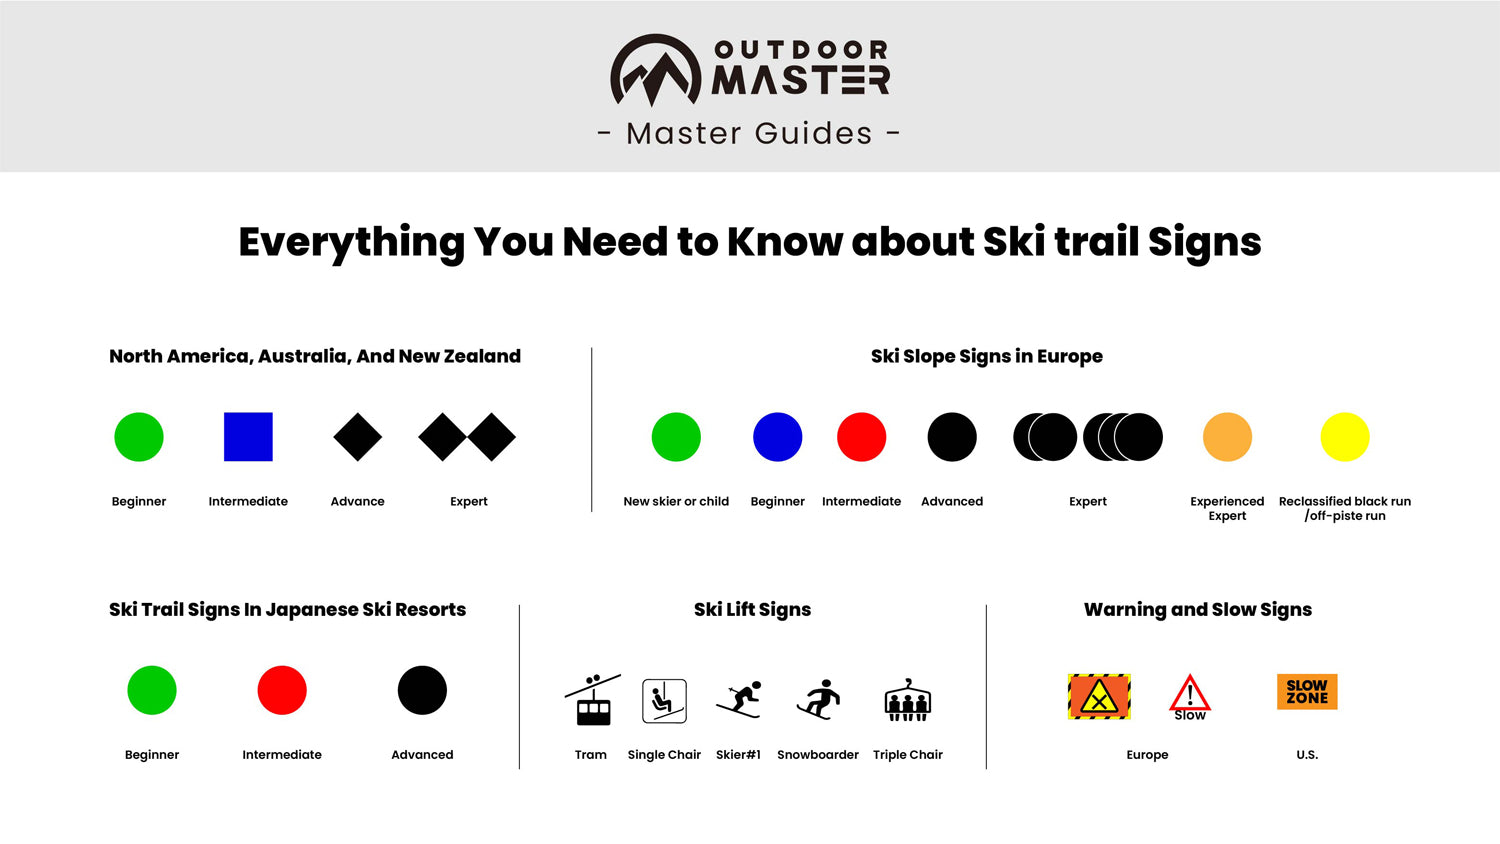 Ski Trail Signs 101: Everything You Need to Know